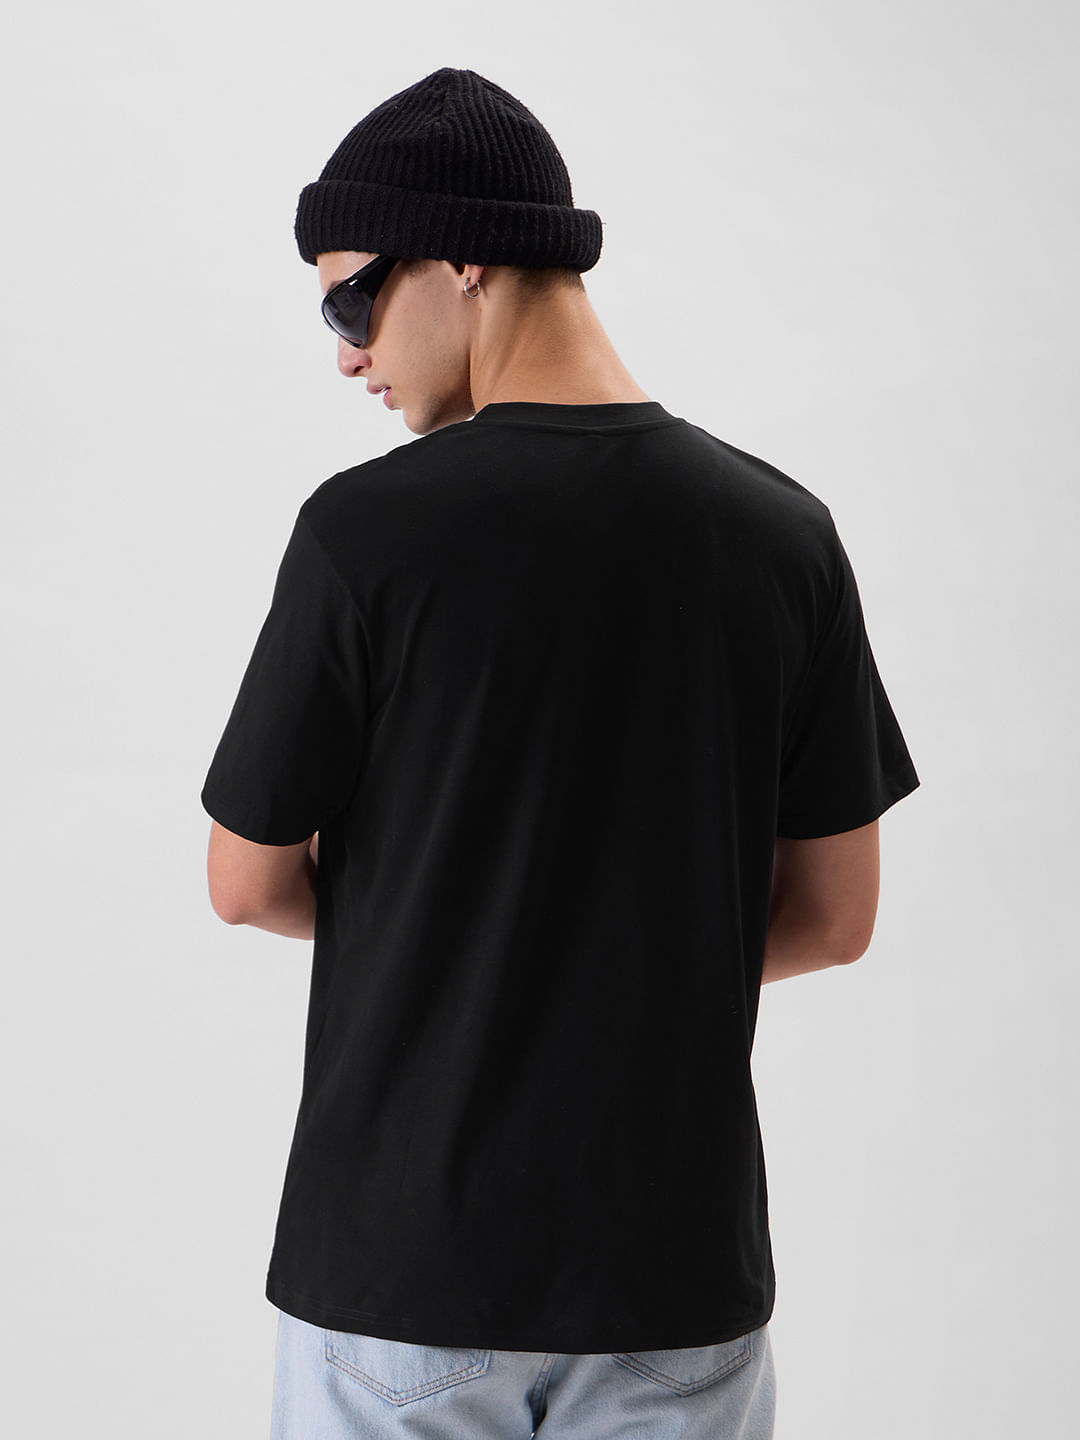 Buy Daredevil: No Fear Oversized T-Shirts Online